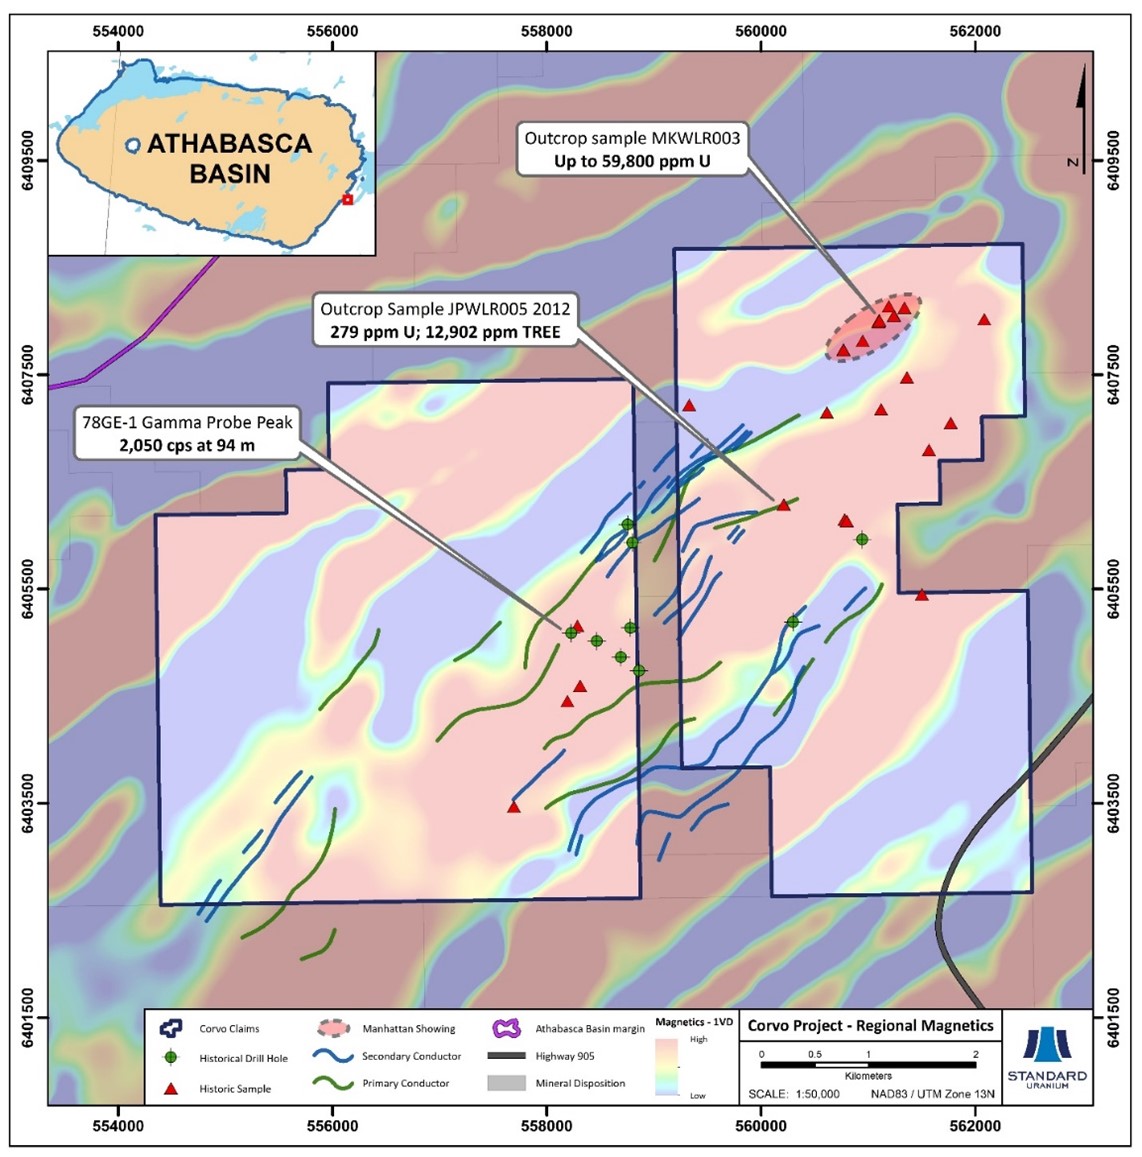 Plan map showing the magnetic low/EM conductor trends on the Corvo project highlighting historical samples and drill holes with anomalous uranium and/or radioactivity, with first vertical derivative magnetics in the background. The Manhattan showing is highlighted on the eastern Corvo claim block.